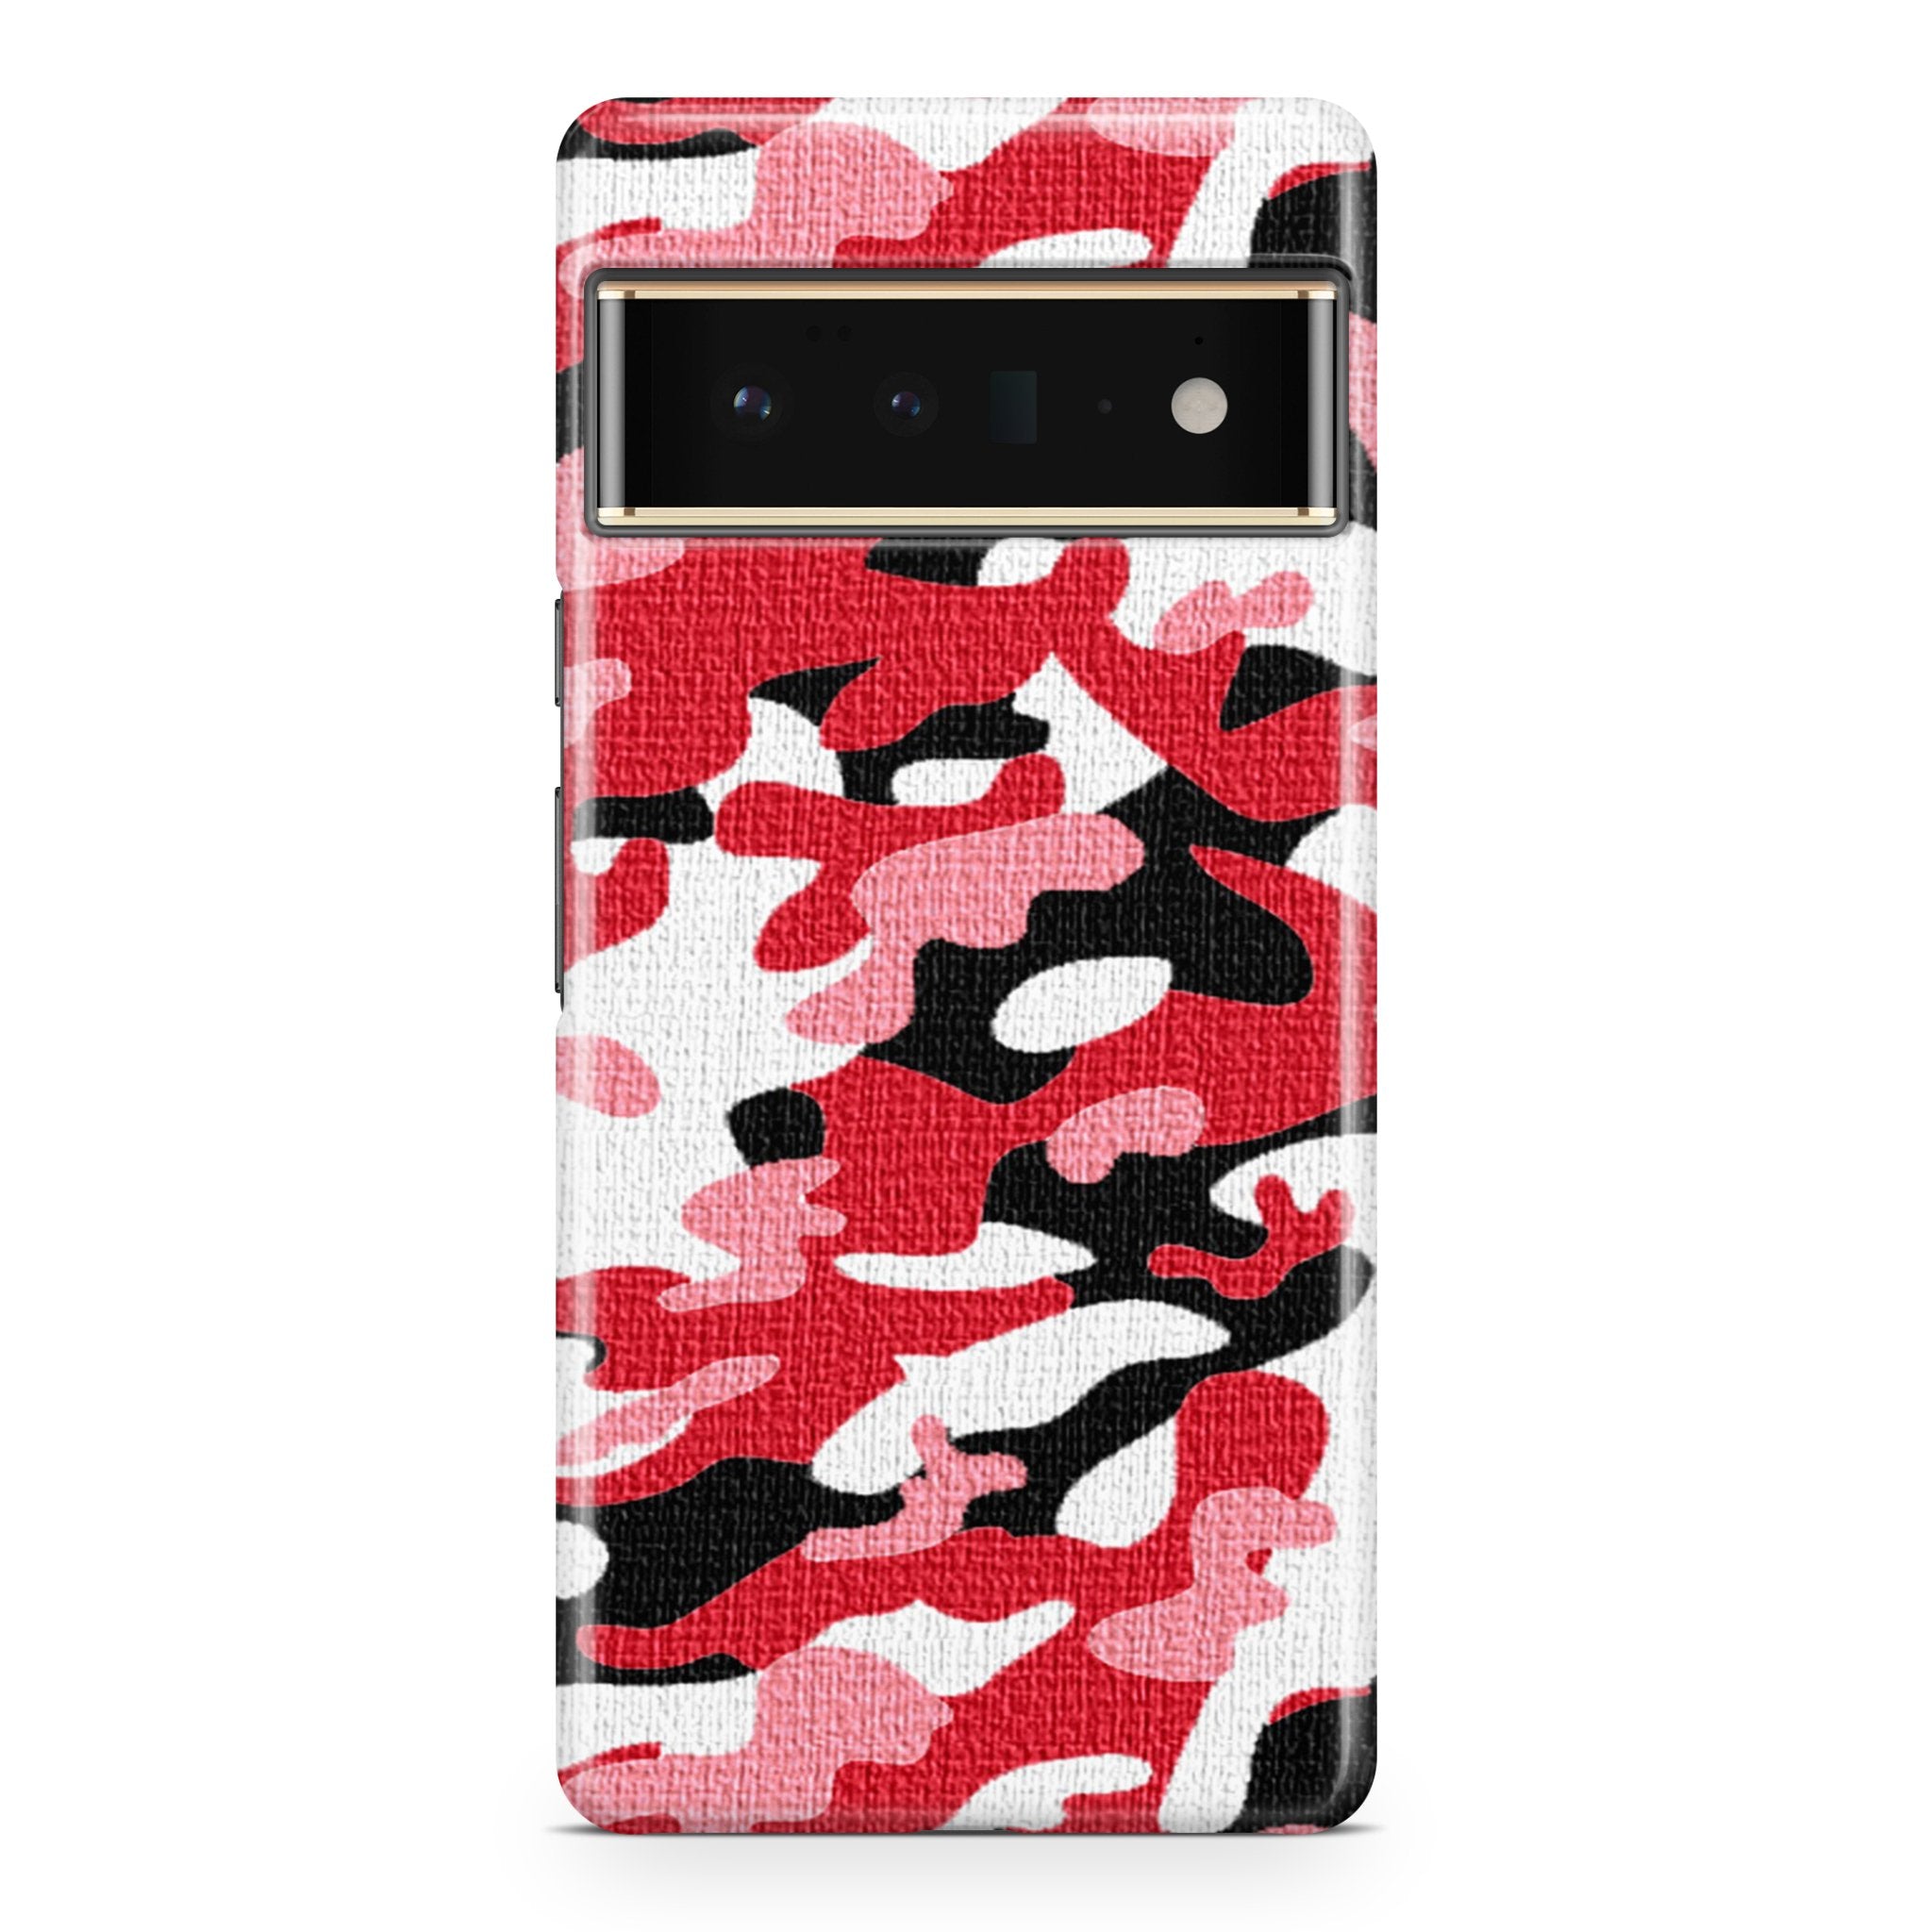 Red Camo - Google phone case designs by CaseSwagger